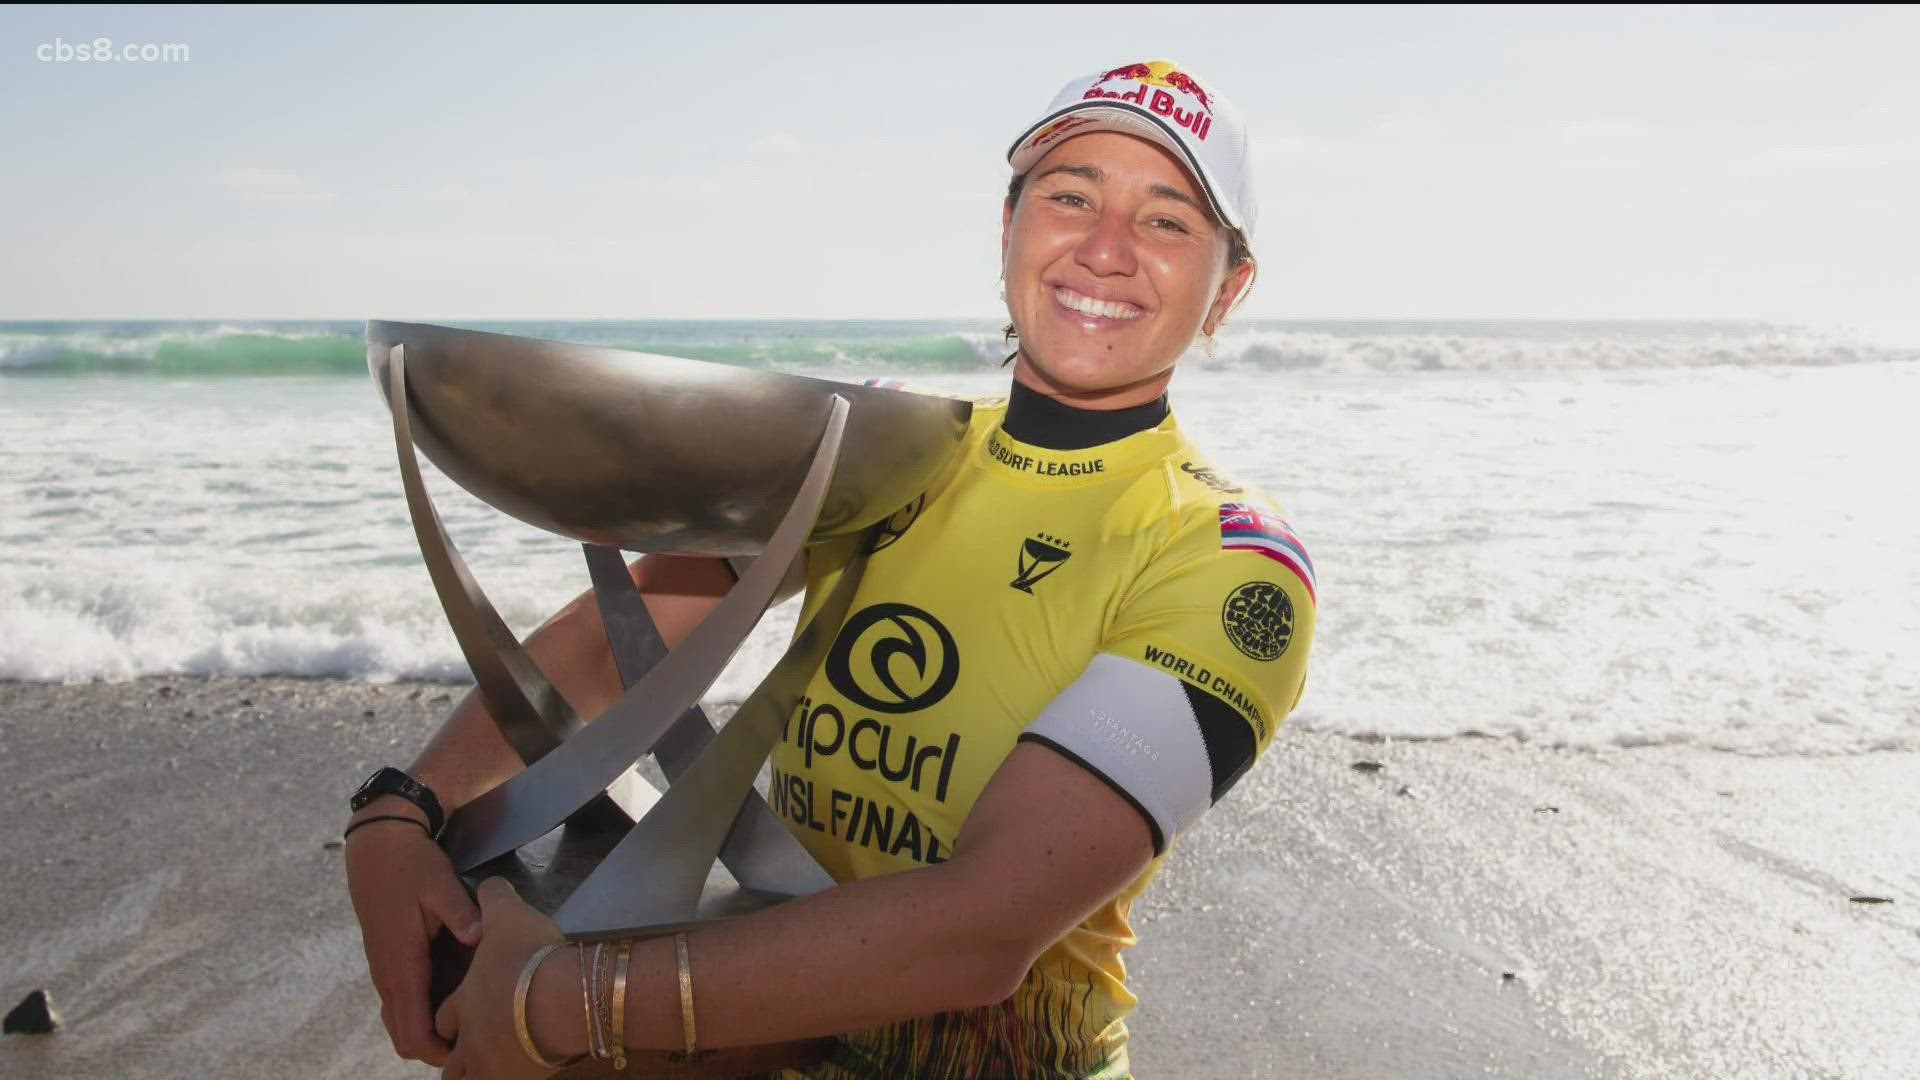 She's an Olympic gold medalist and a five-time world champion surfer, Carissa Moore sat down with News 8 to talk about what has been going on in her life.